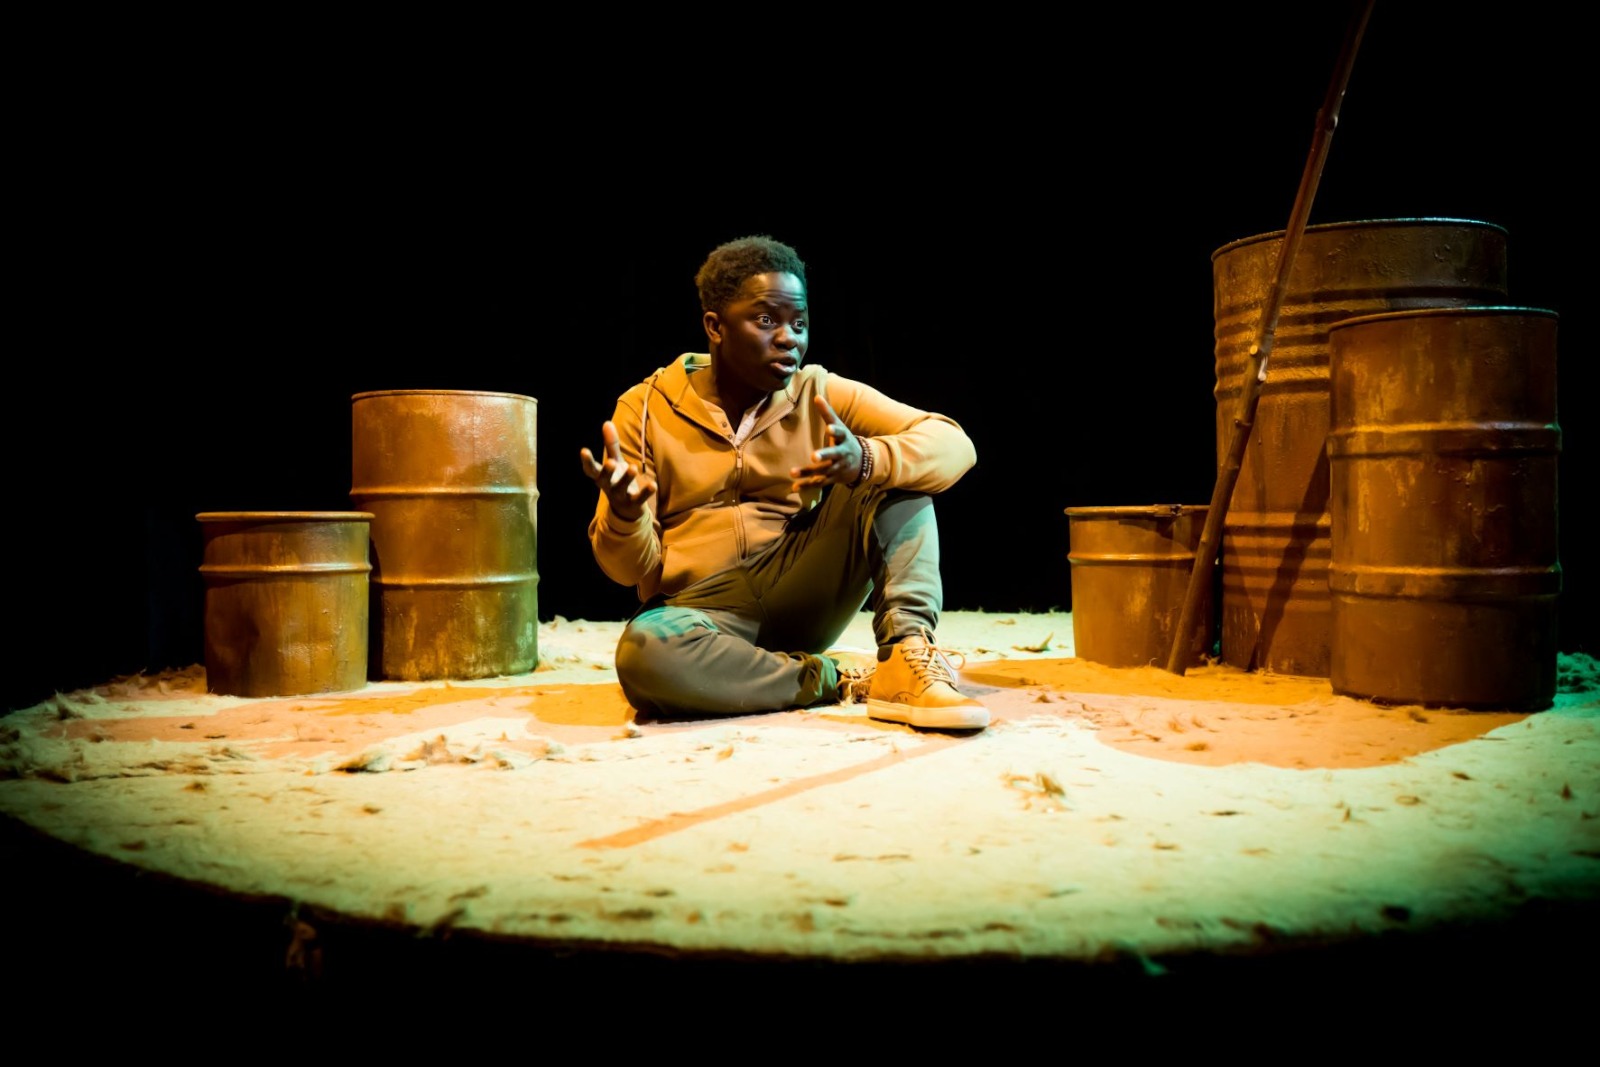 Person seated on stage surrounded by metal barrels